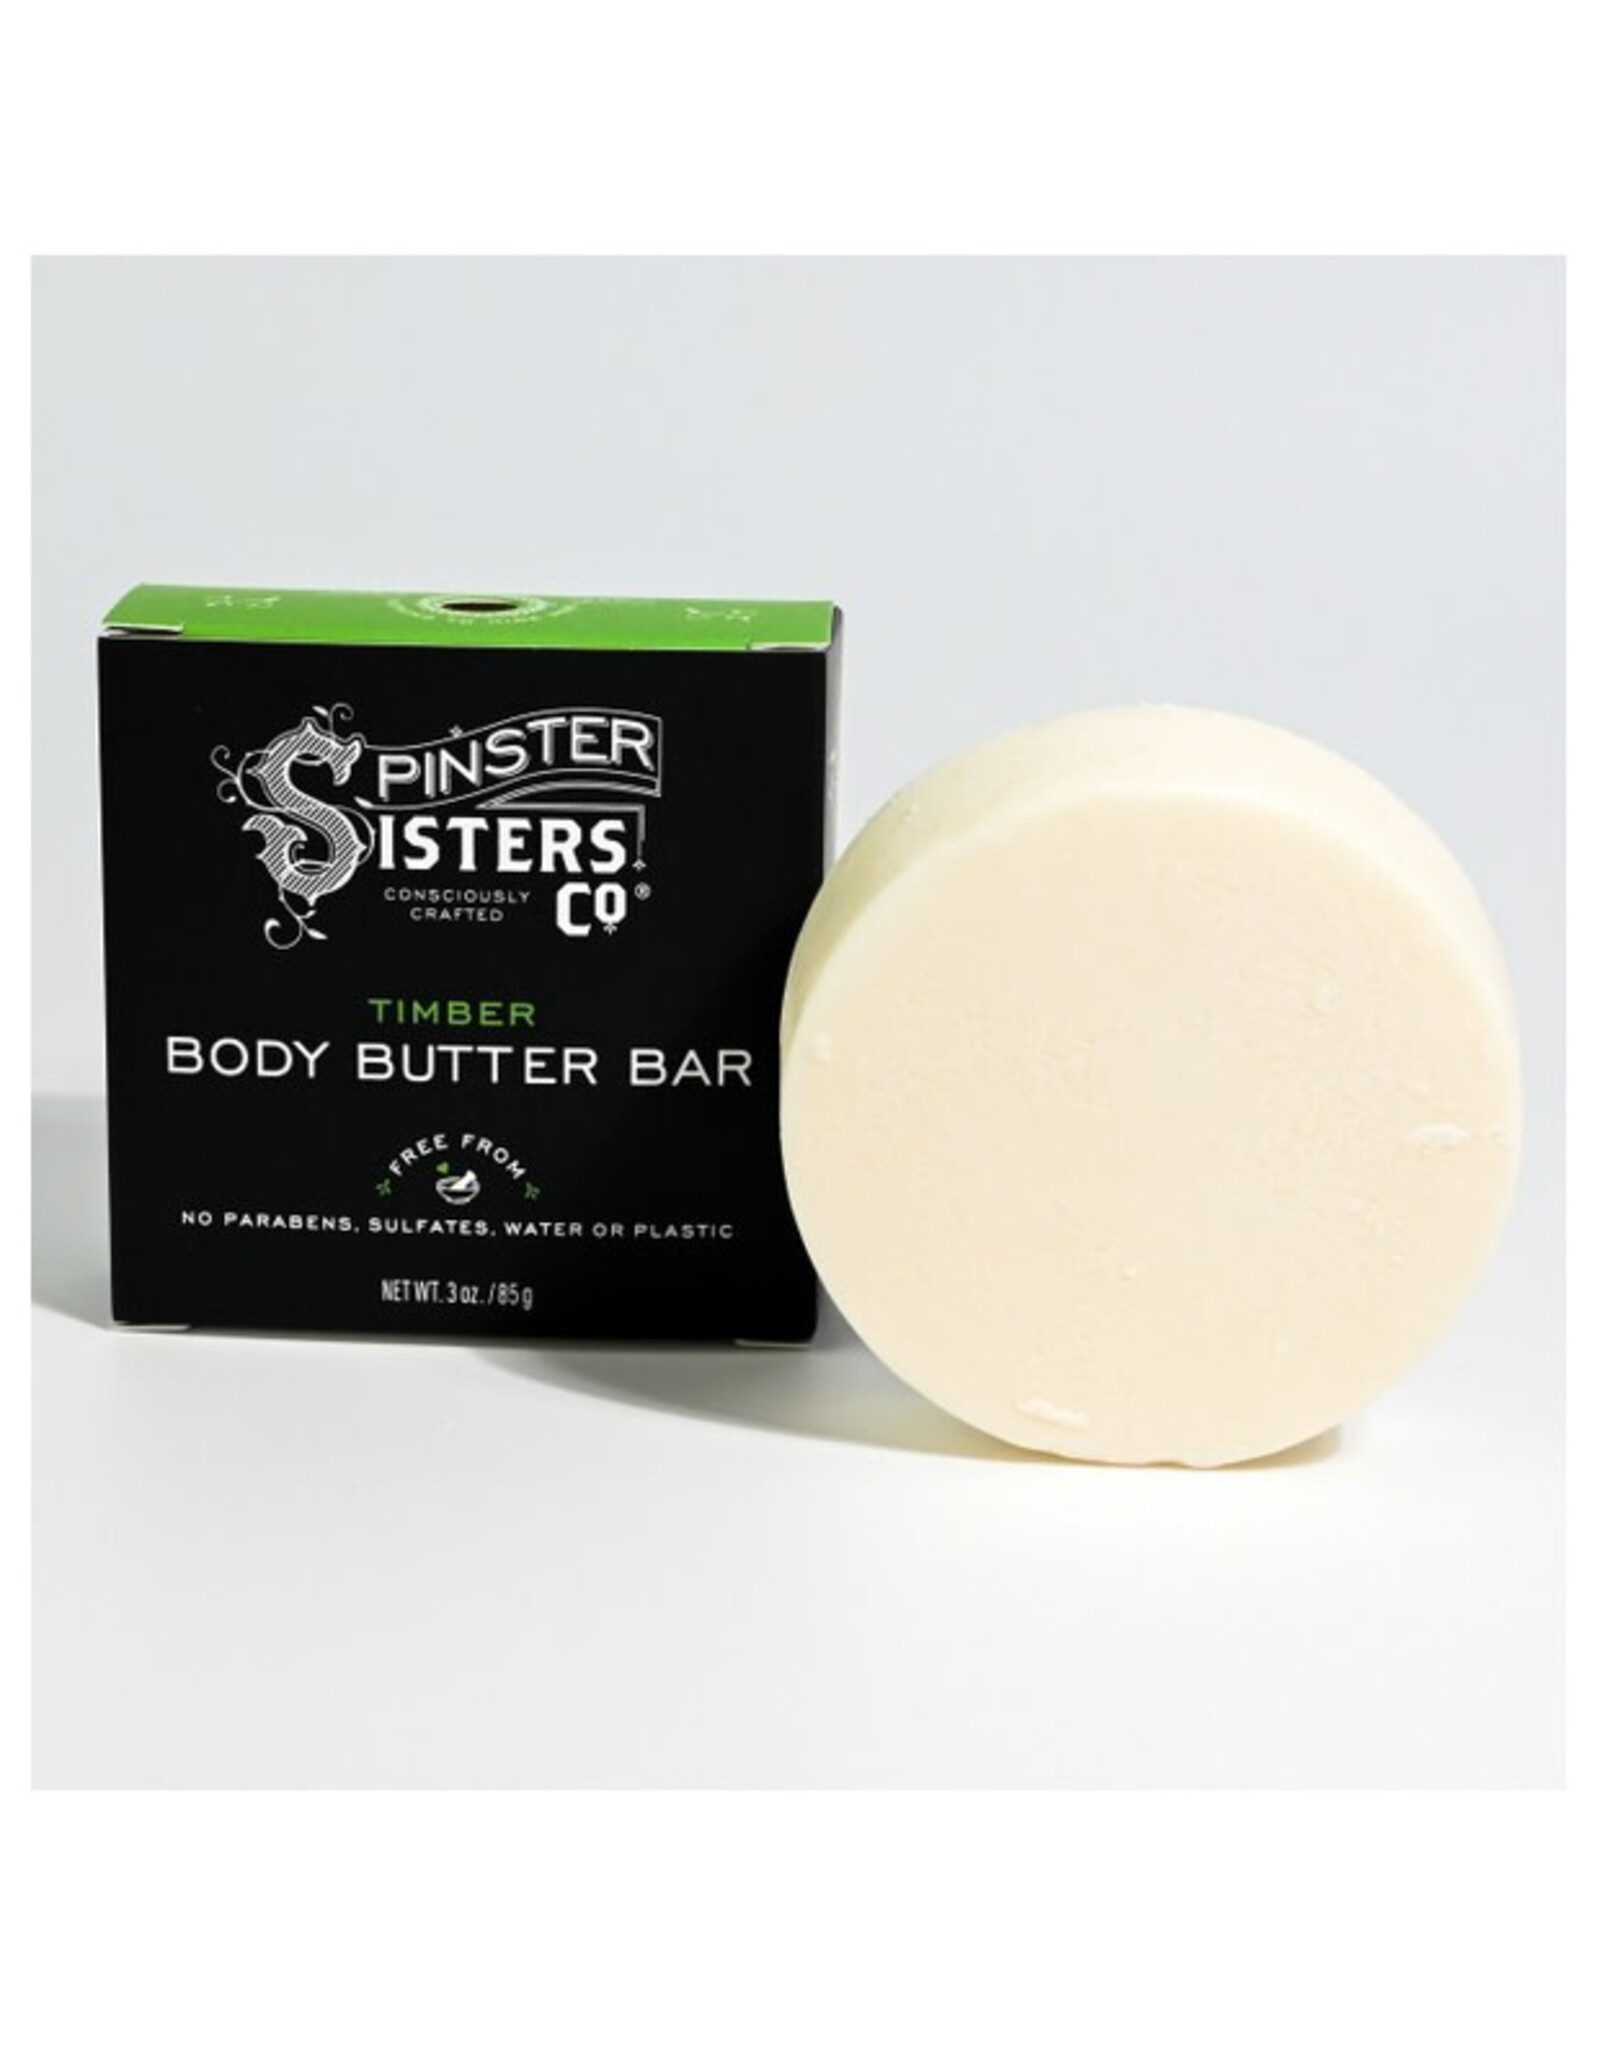 Spinster Sisters Timber Body Butter Bar